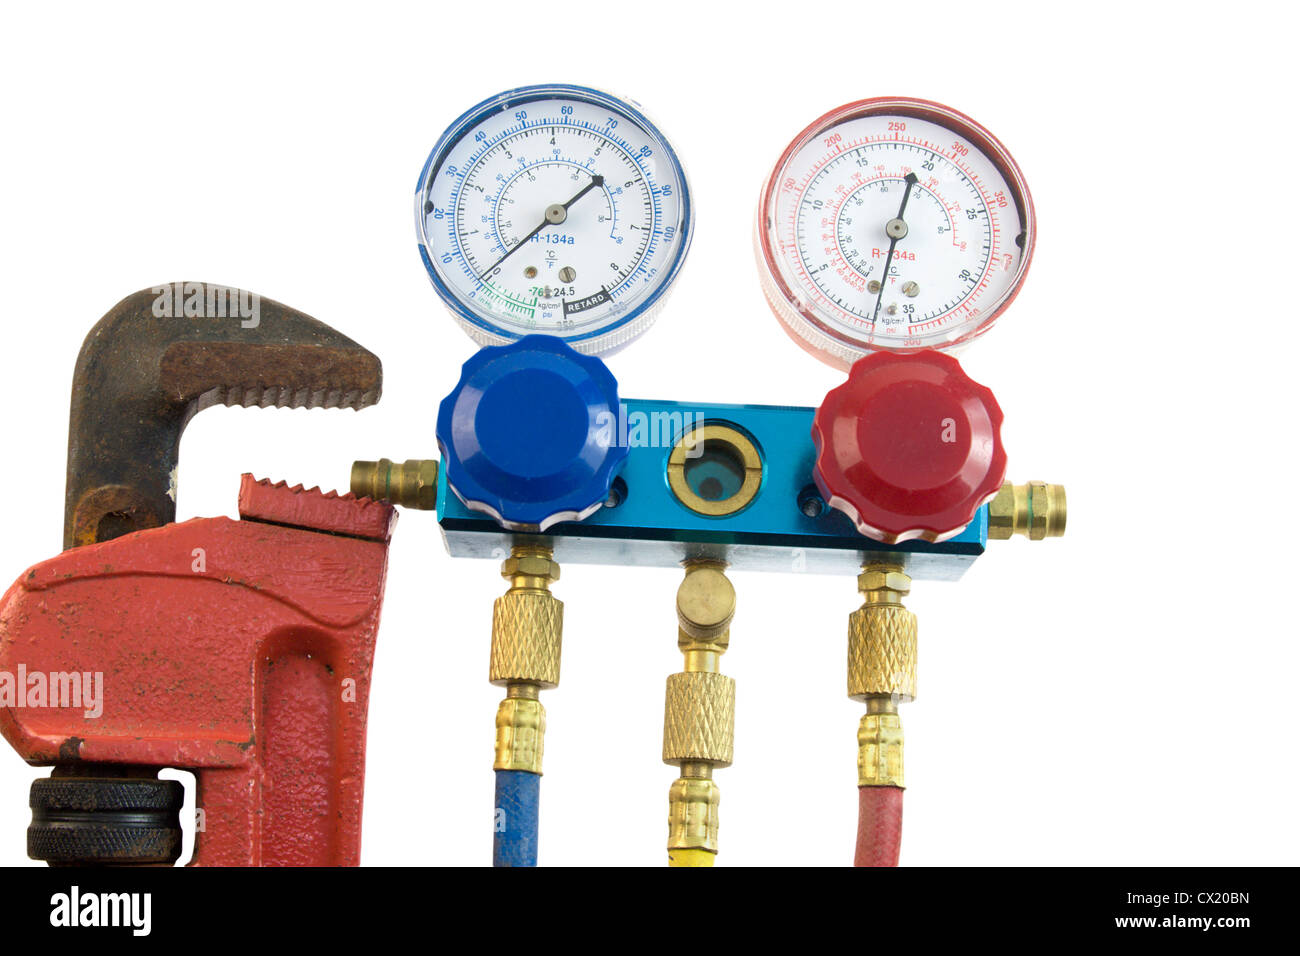 air conditioning manifold with high and low pressure gauges and valves commonly used in HVAC maintenance Stock Photo